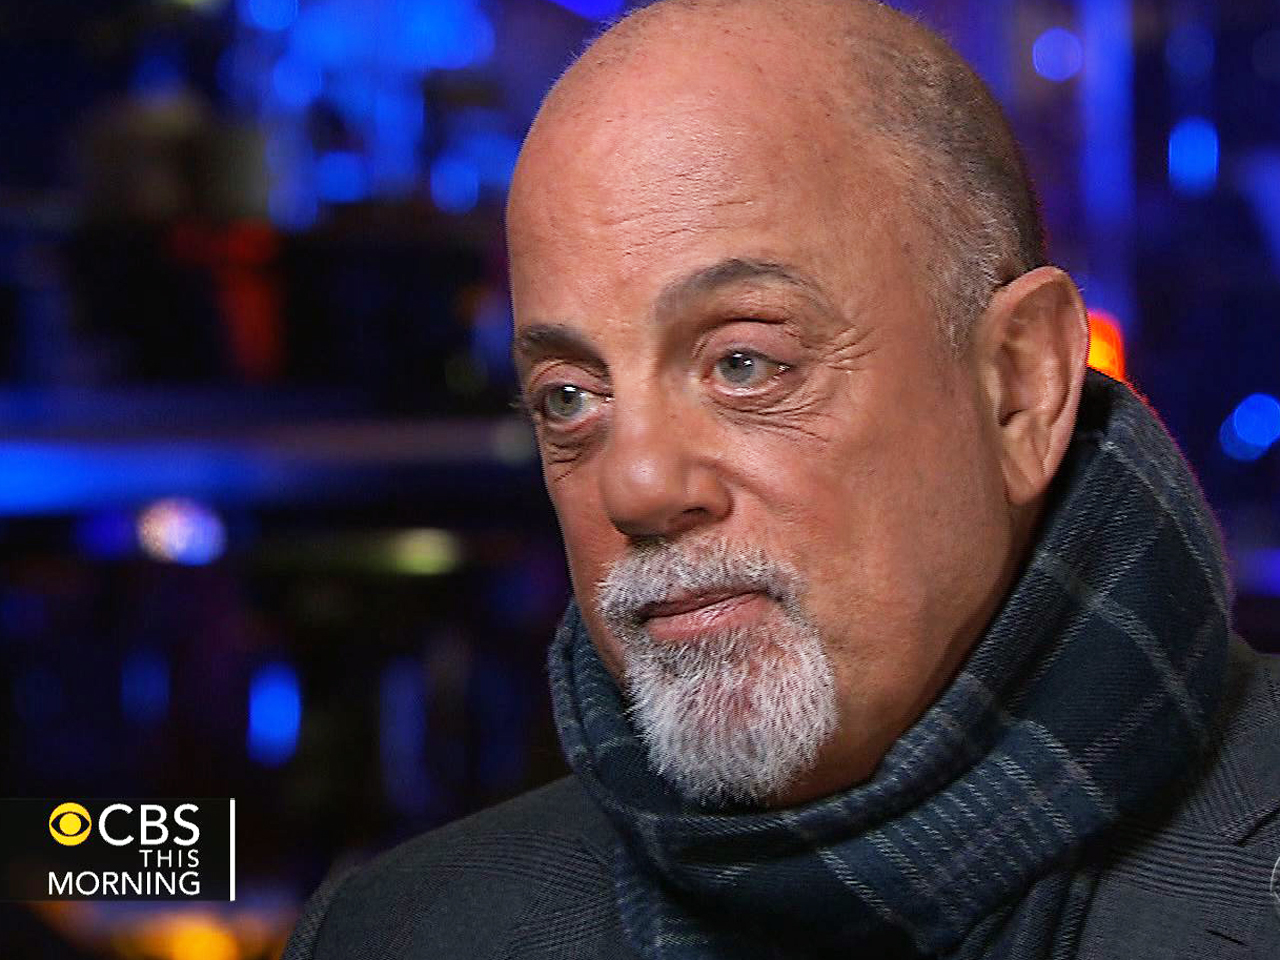 Billy Joel opens up about writing music, his career, who inspires him